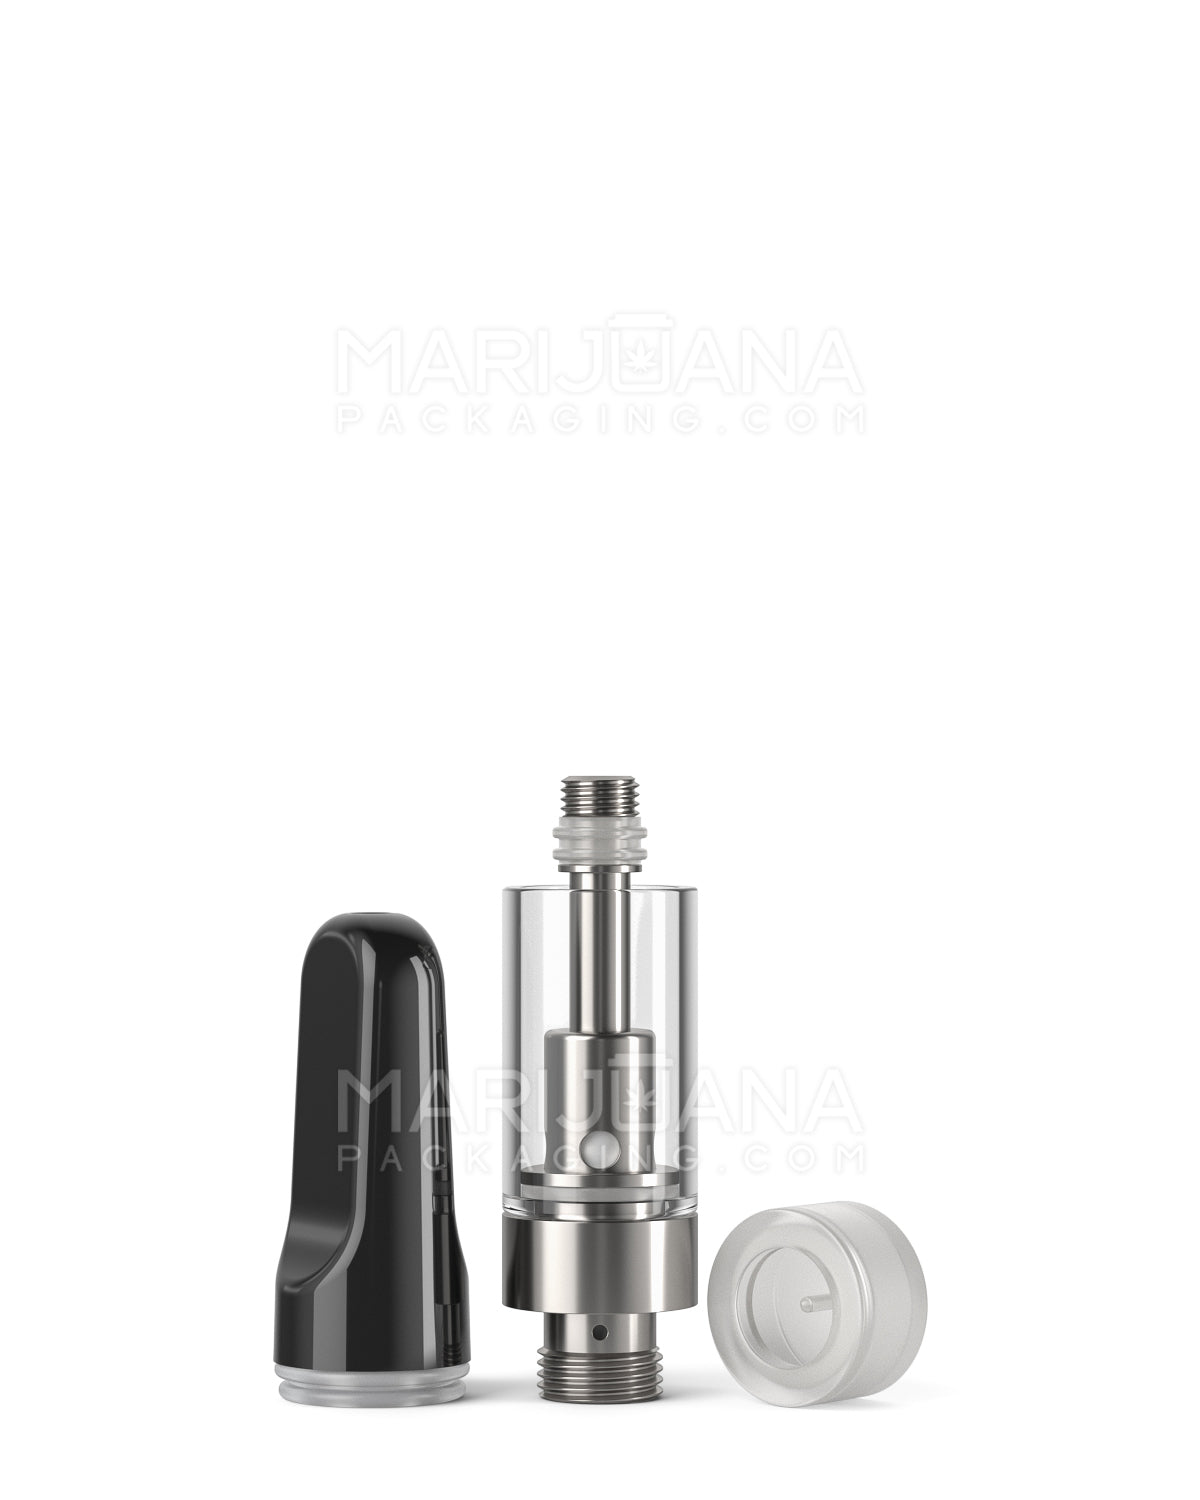 CCELL | Liquid6 Reactor Glass Vape Cartridge with Black Ceramic Mouthpiece | 0.5mL - Screw On - 100 Count - 8